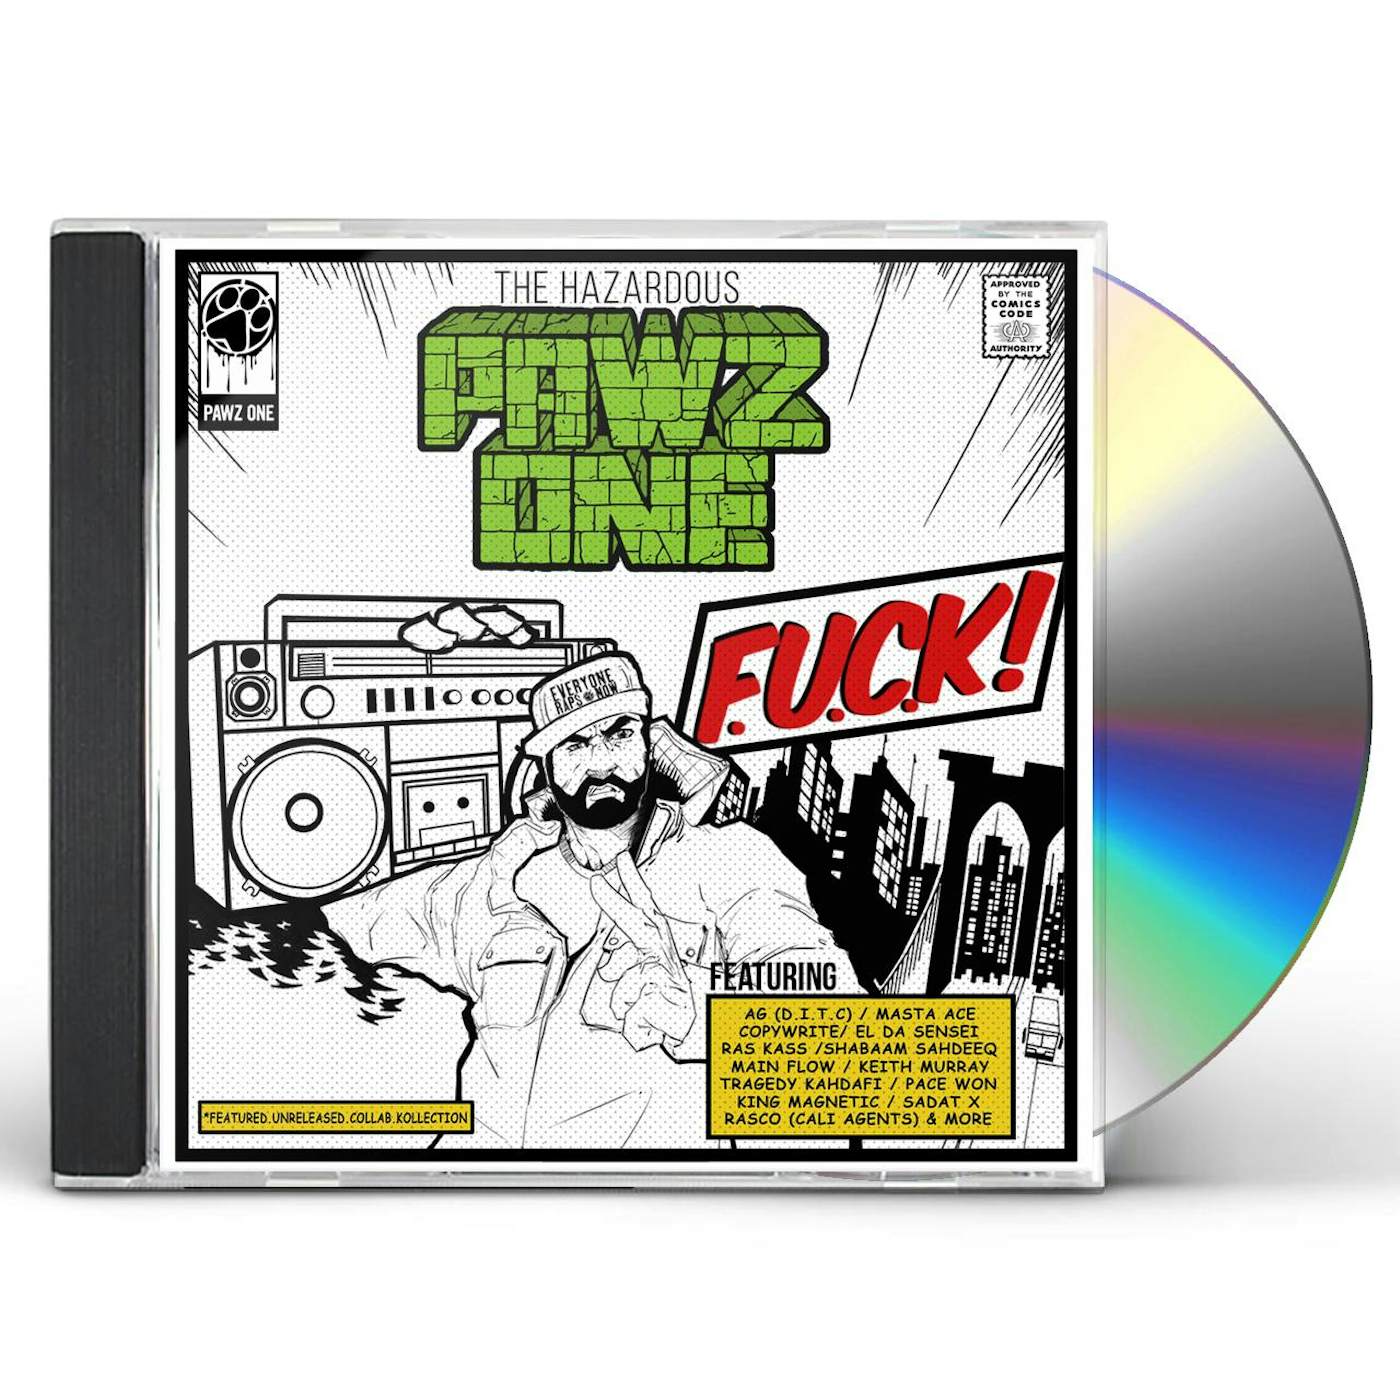 Pawz One F.U.C.K. (FEATURED UNRELEASED COLLAB KOLLECTION) CD